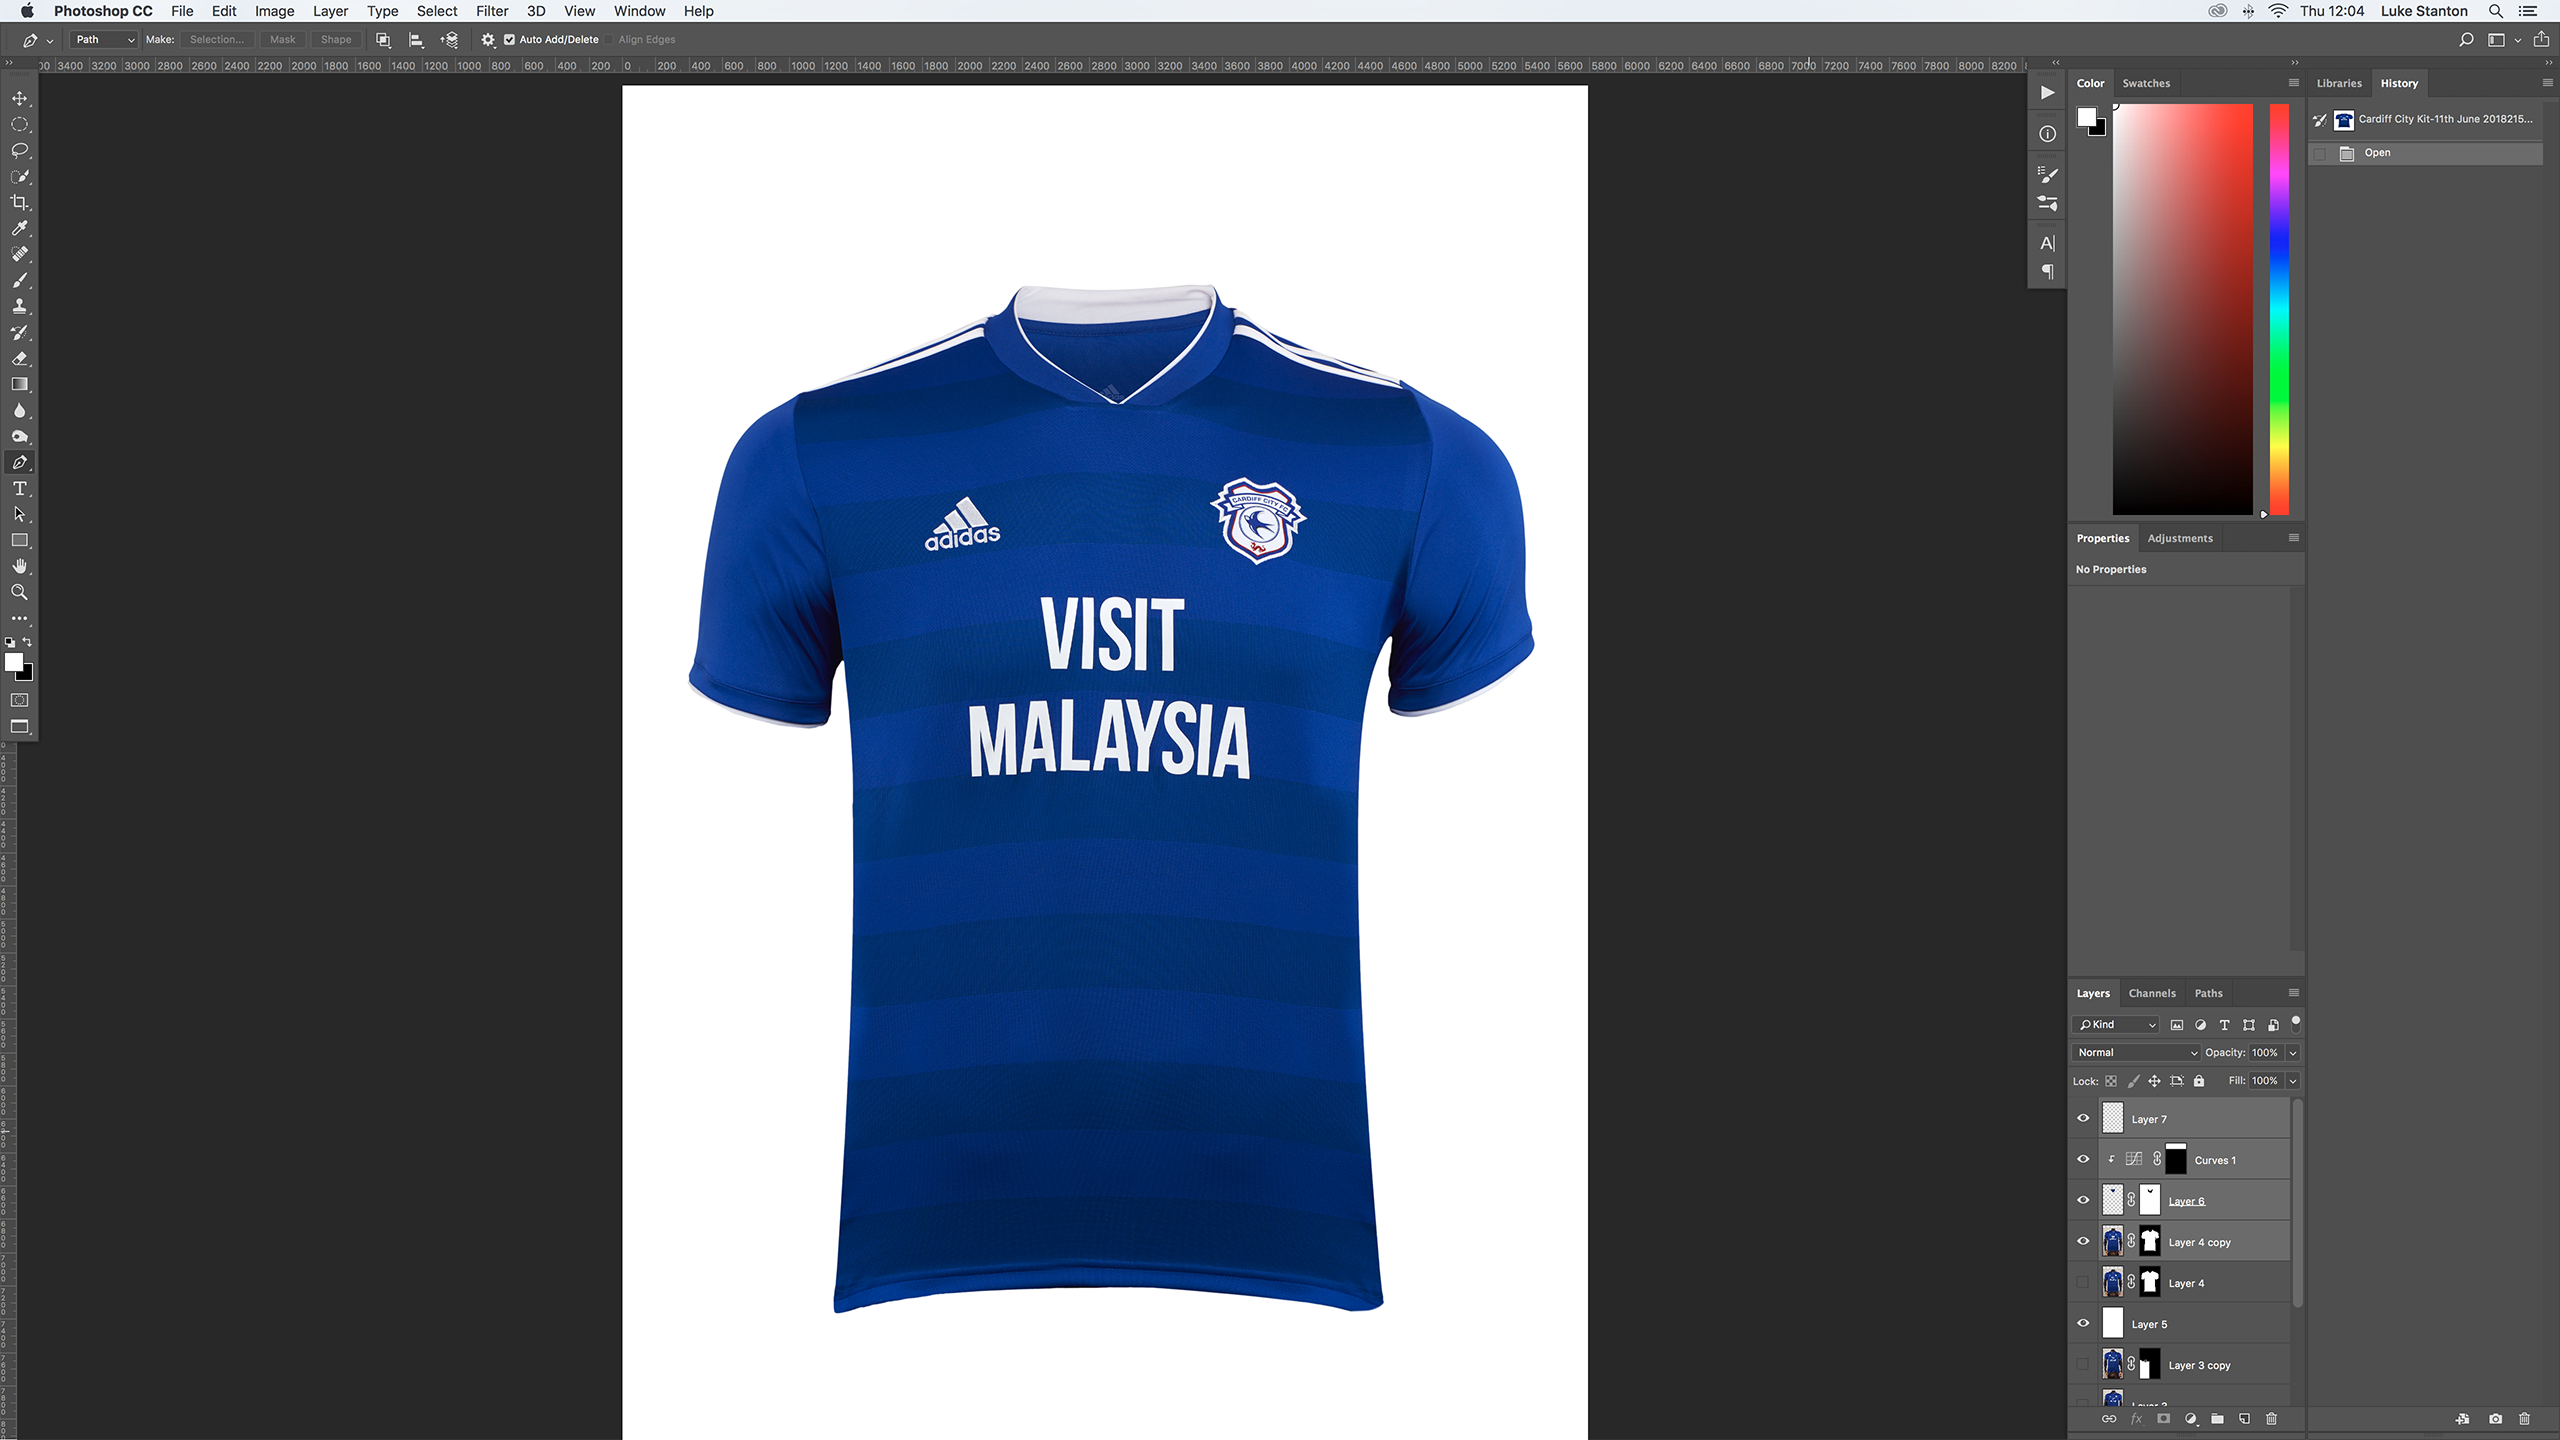 Photo Editing for Cardiff City Football Product Photography (3)